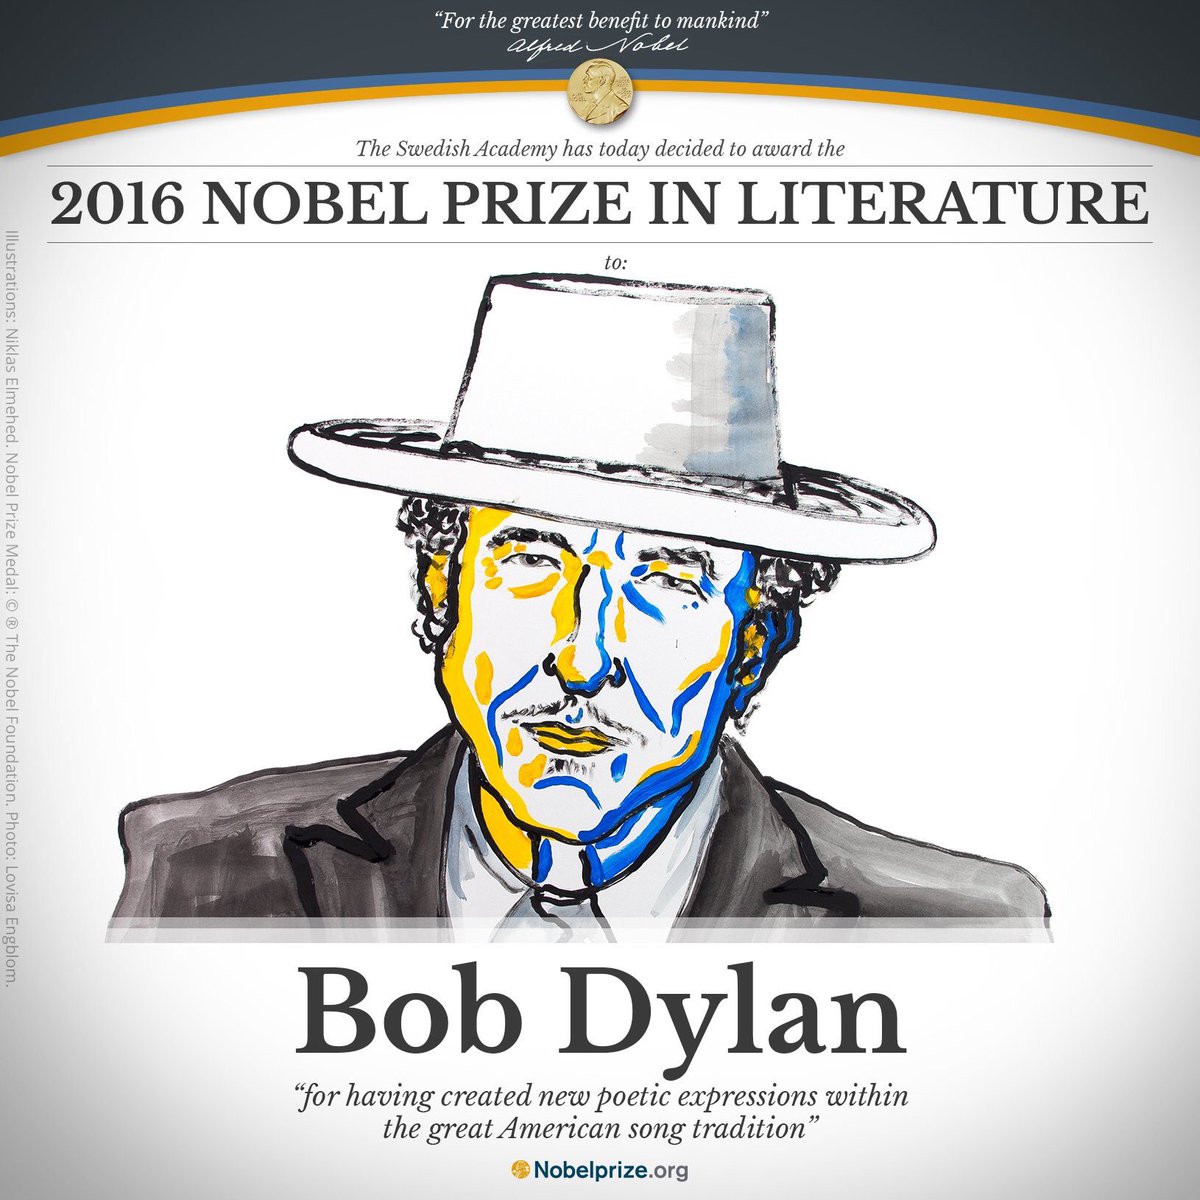 Dylan accused of lifting passages of Nobel lecture